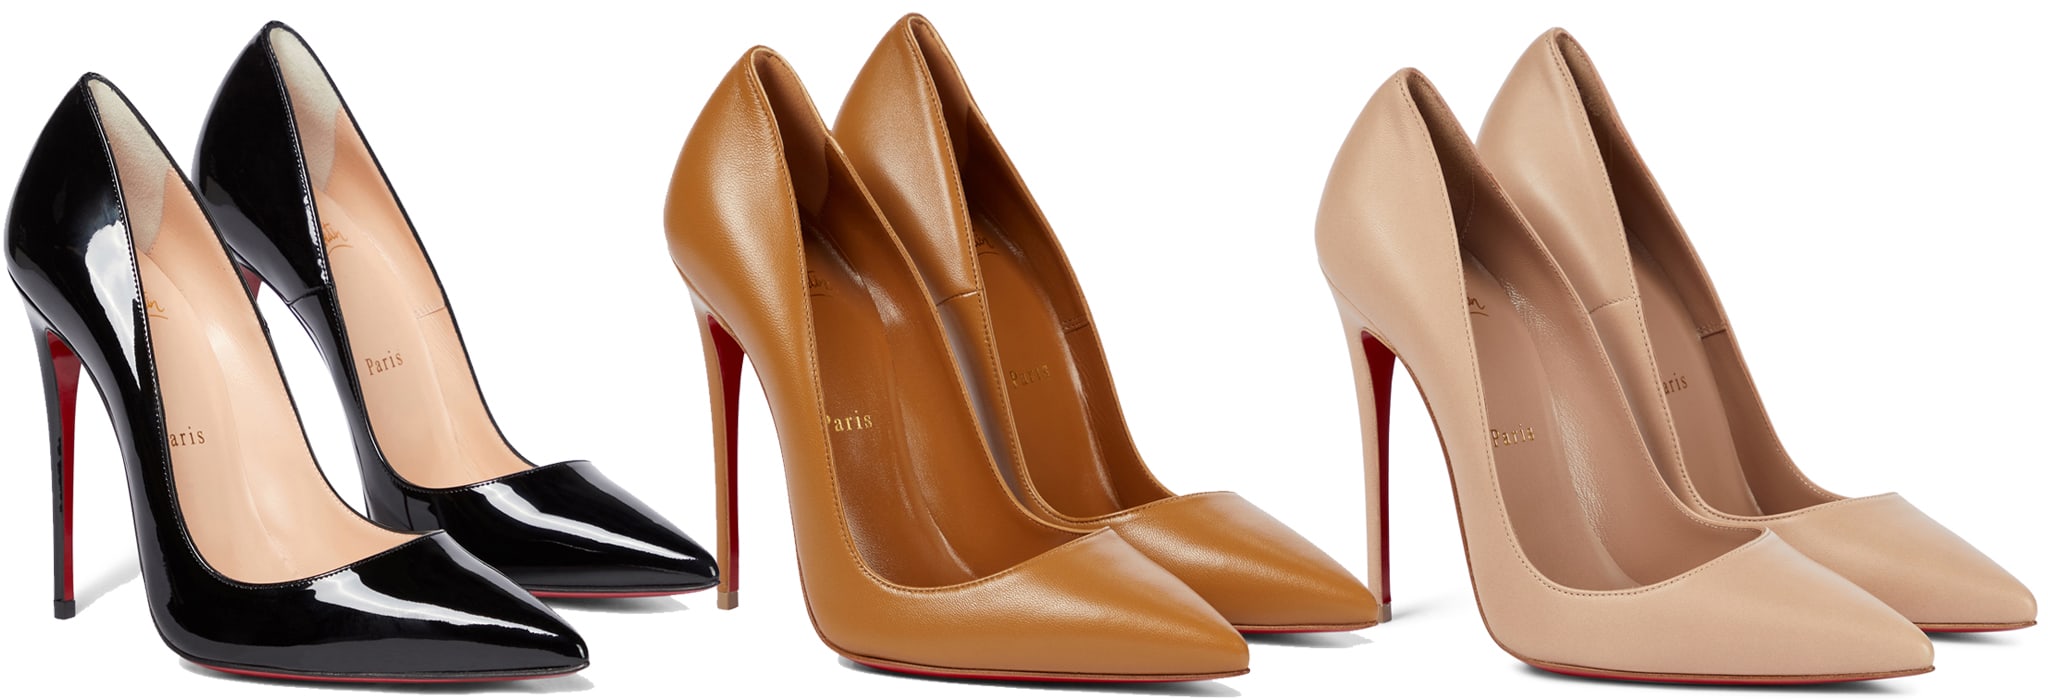 Inspired by supermodel Kate Moss, Christian Louboutin's iconic So Kate pump are another celebrity red-carpet favorite